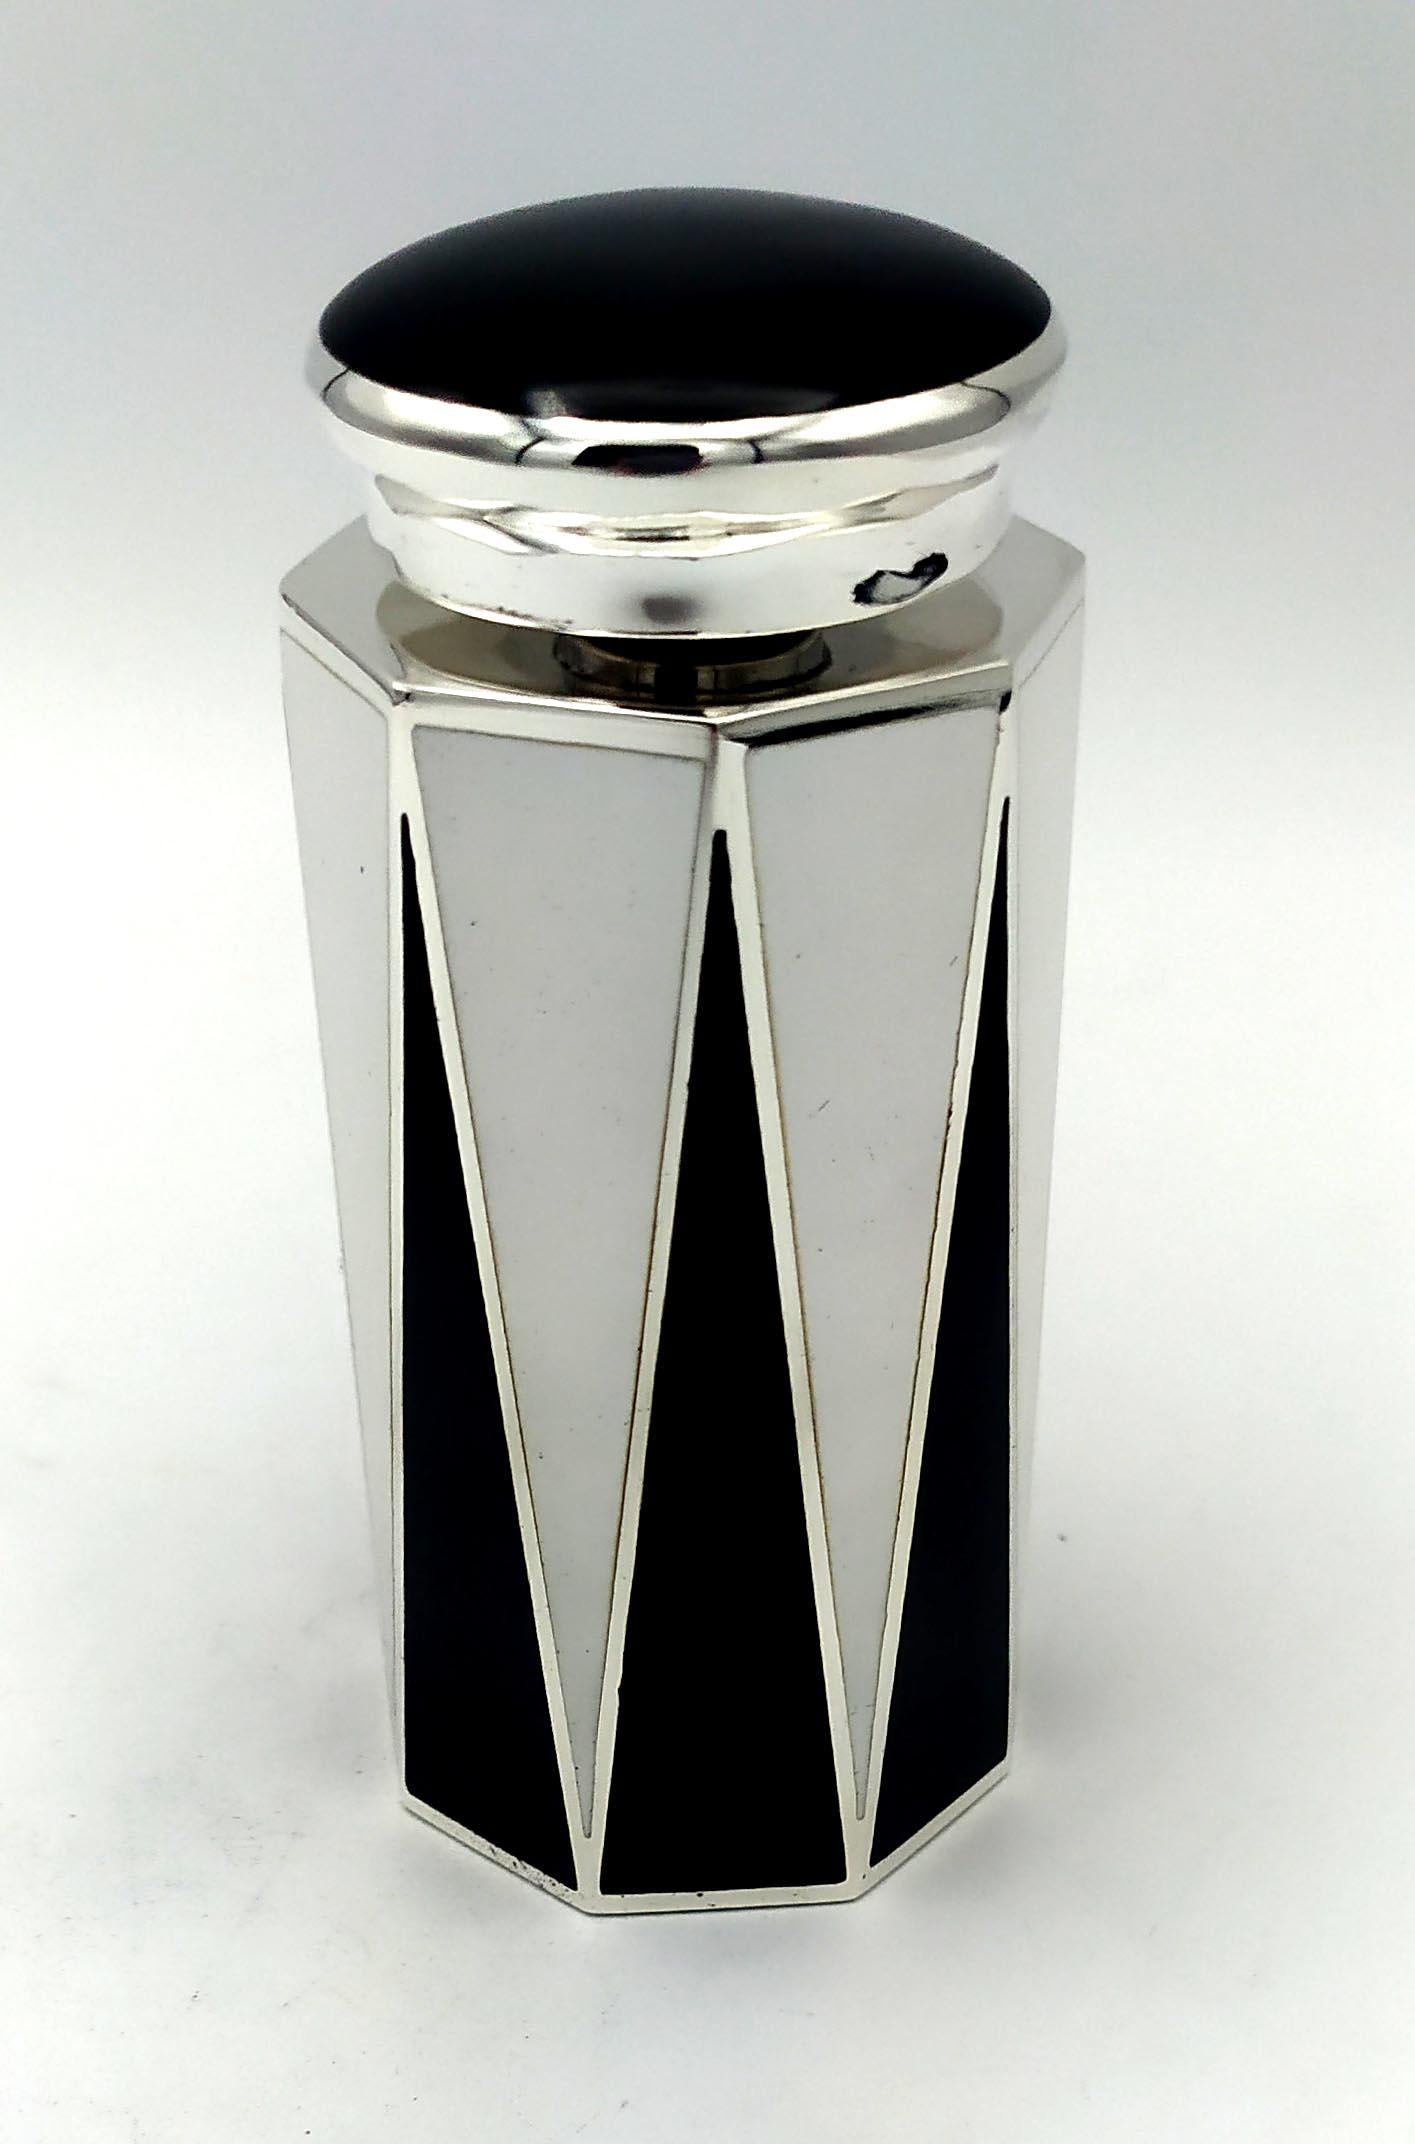 Perfume holder with octagonal base in black and white fired enamelled 925/1000 sterling silver with screw cap, in Art Deco style. Base cm, 4.3 x 4.7 bottle height cm. 8, total height cm. 10.7. Silver weight gr. 195. Designed by Giorgio Salimbeni in